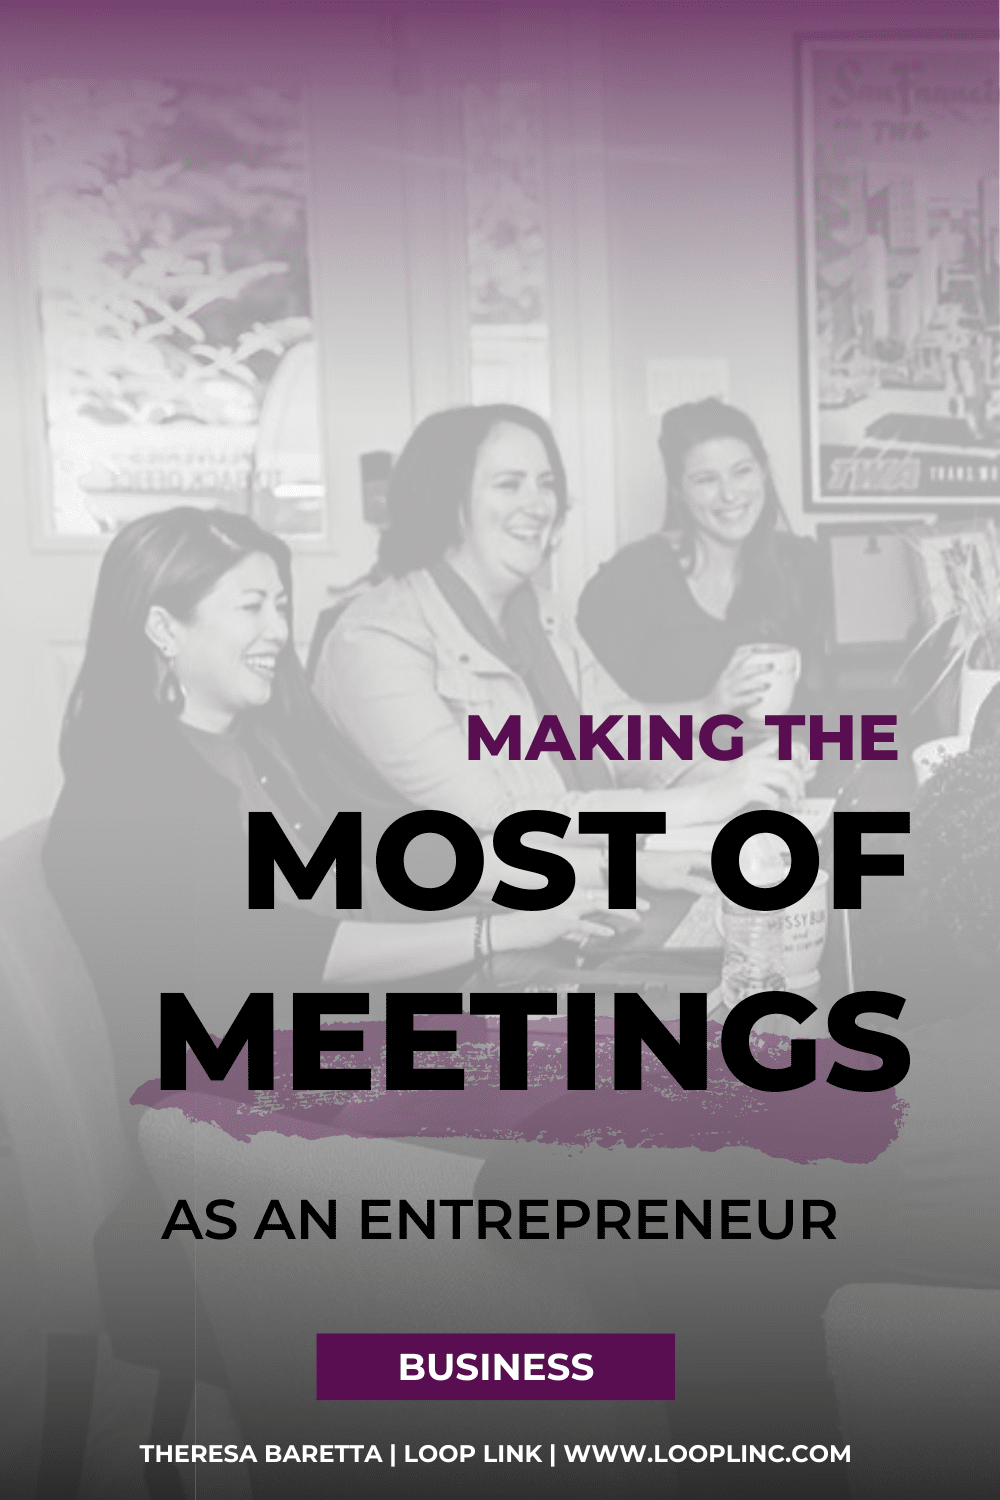 How To Make The Most Out Of Meetings As An Entrepreneur